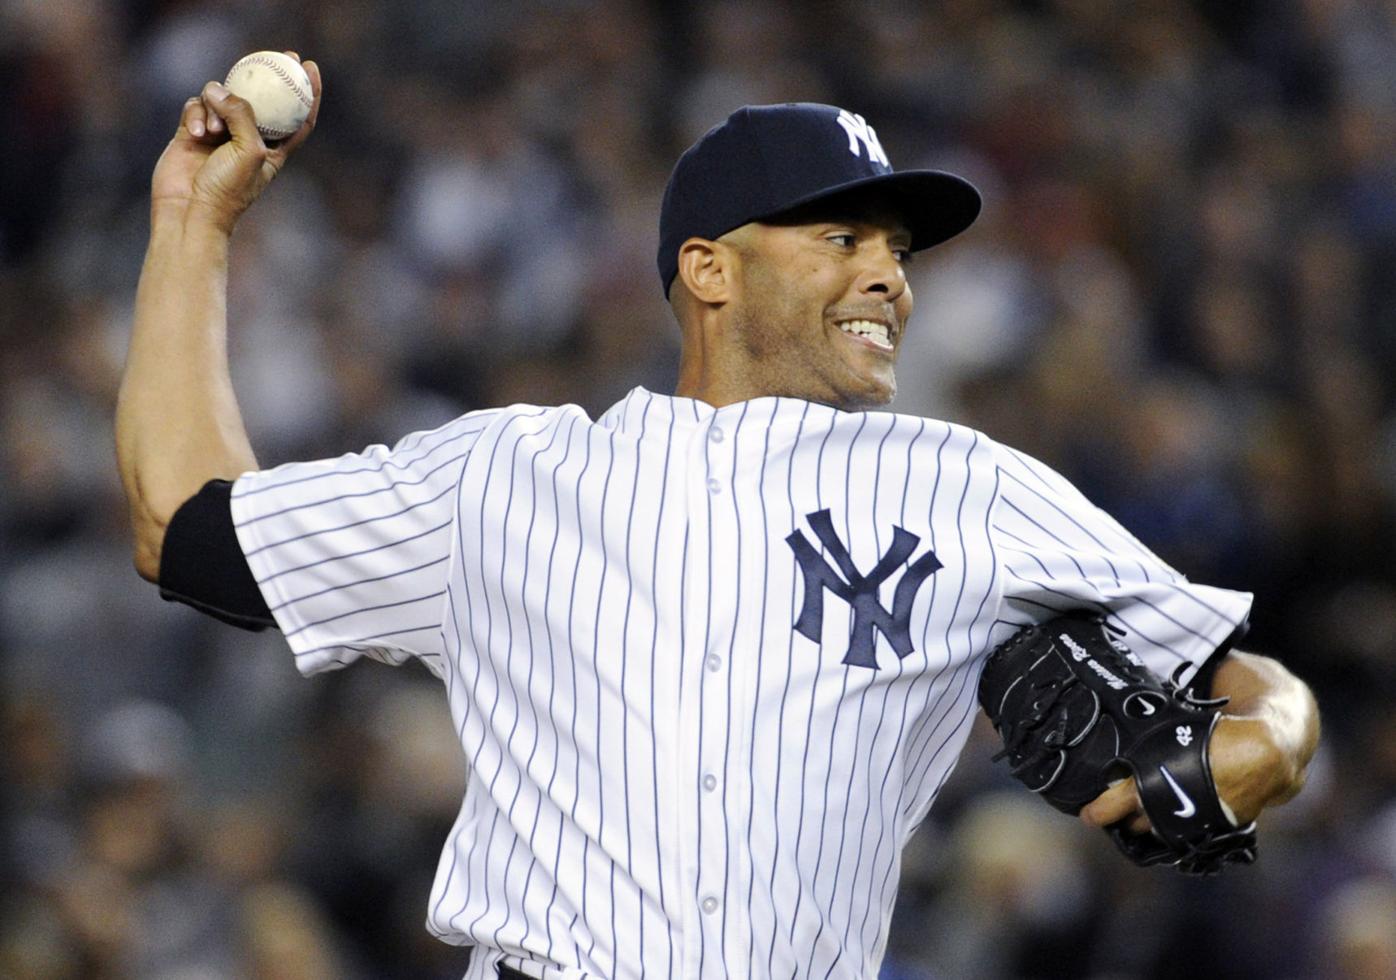 Enter Rivera: Yankee closer awaits his place in Hall of Fame